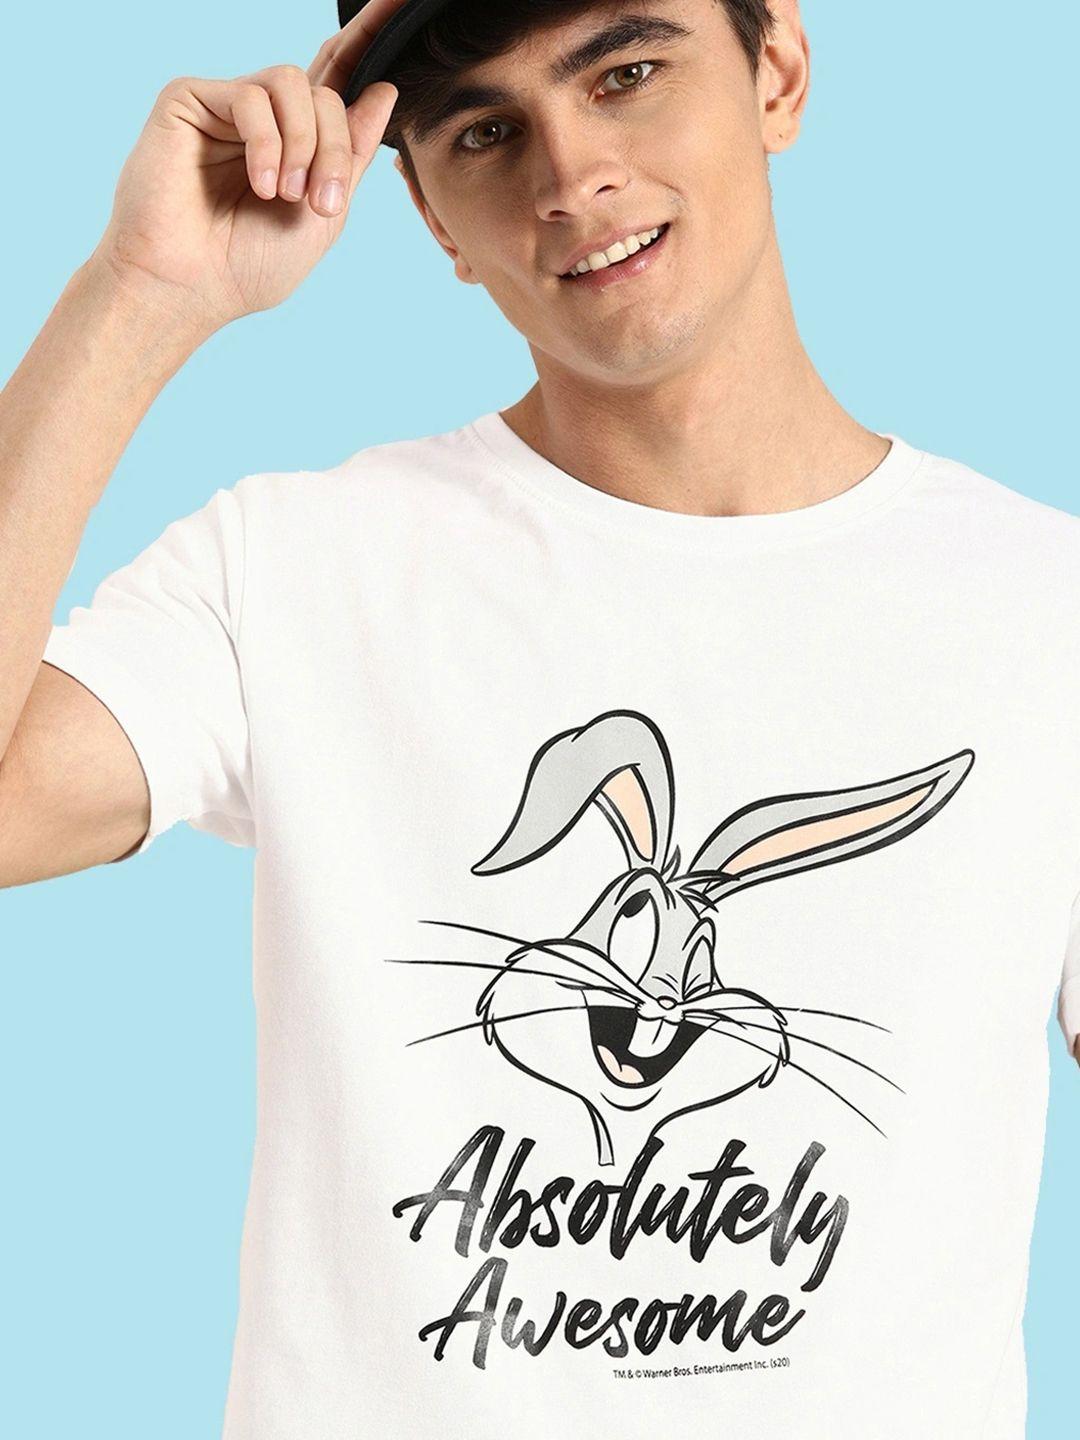 bewakoof-official-looney-tunes-merchandise-absolutely-awesome-graphic-printed-t-shirt